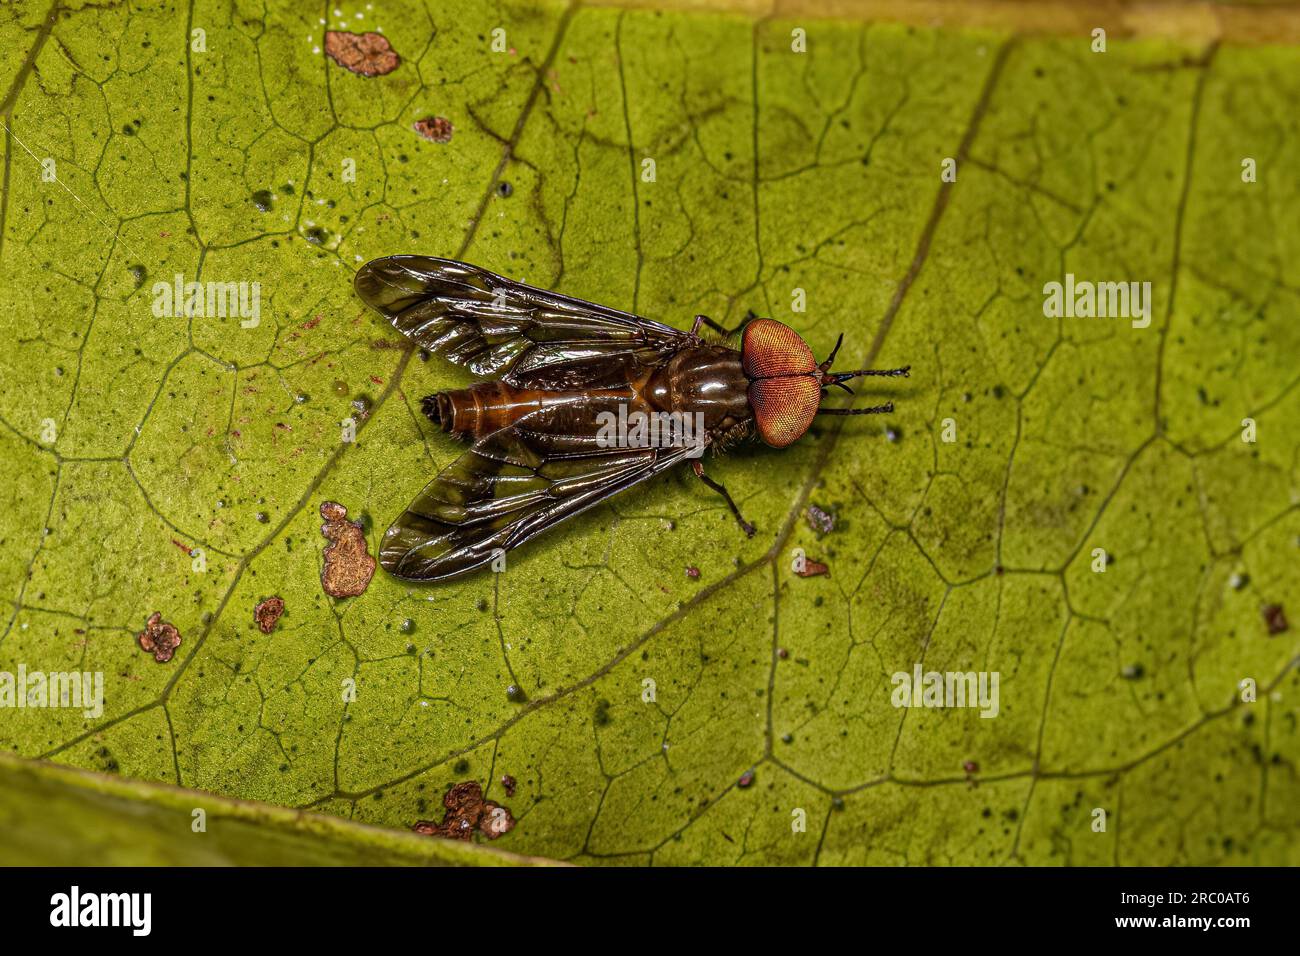 Adult Horse Fly Insect of the Subfamily Tabaninae Stock Photo